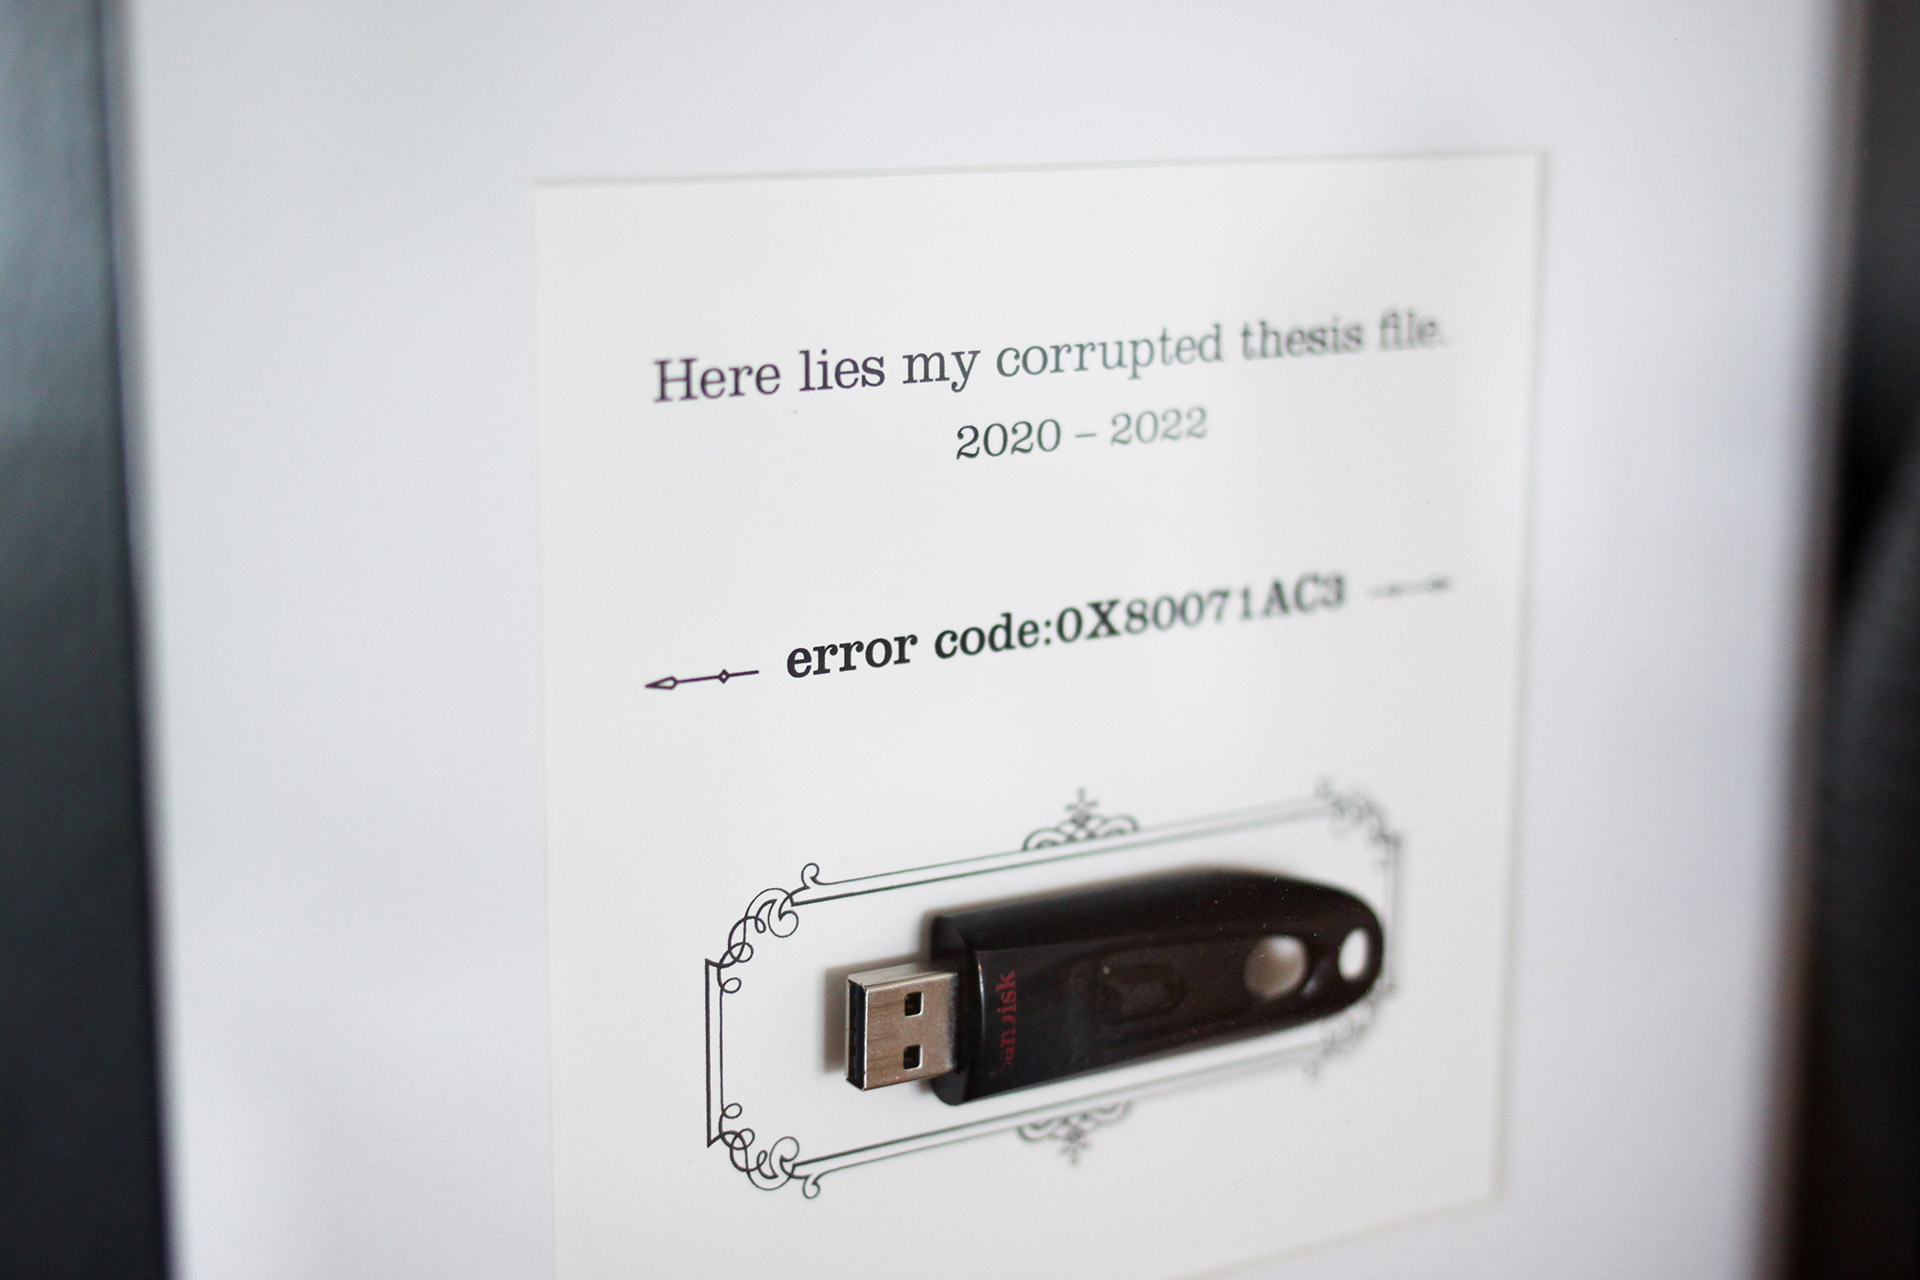 A corrupted USB drive within a frame with its error code